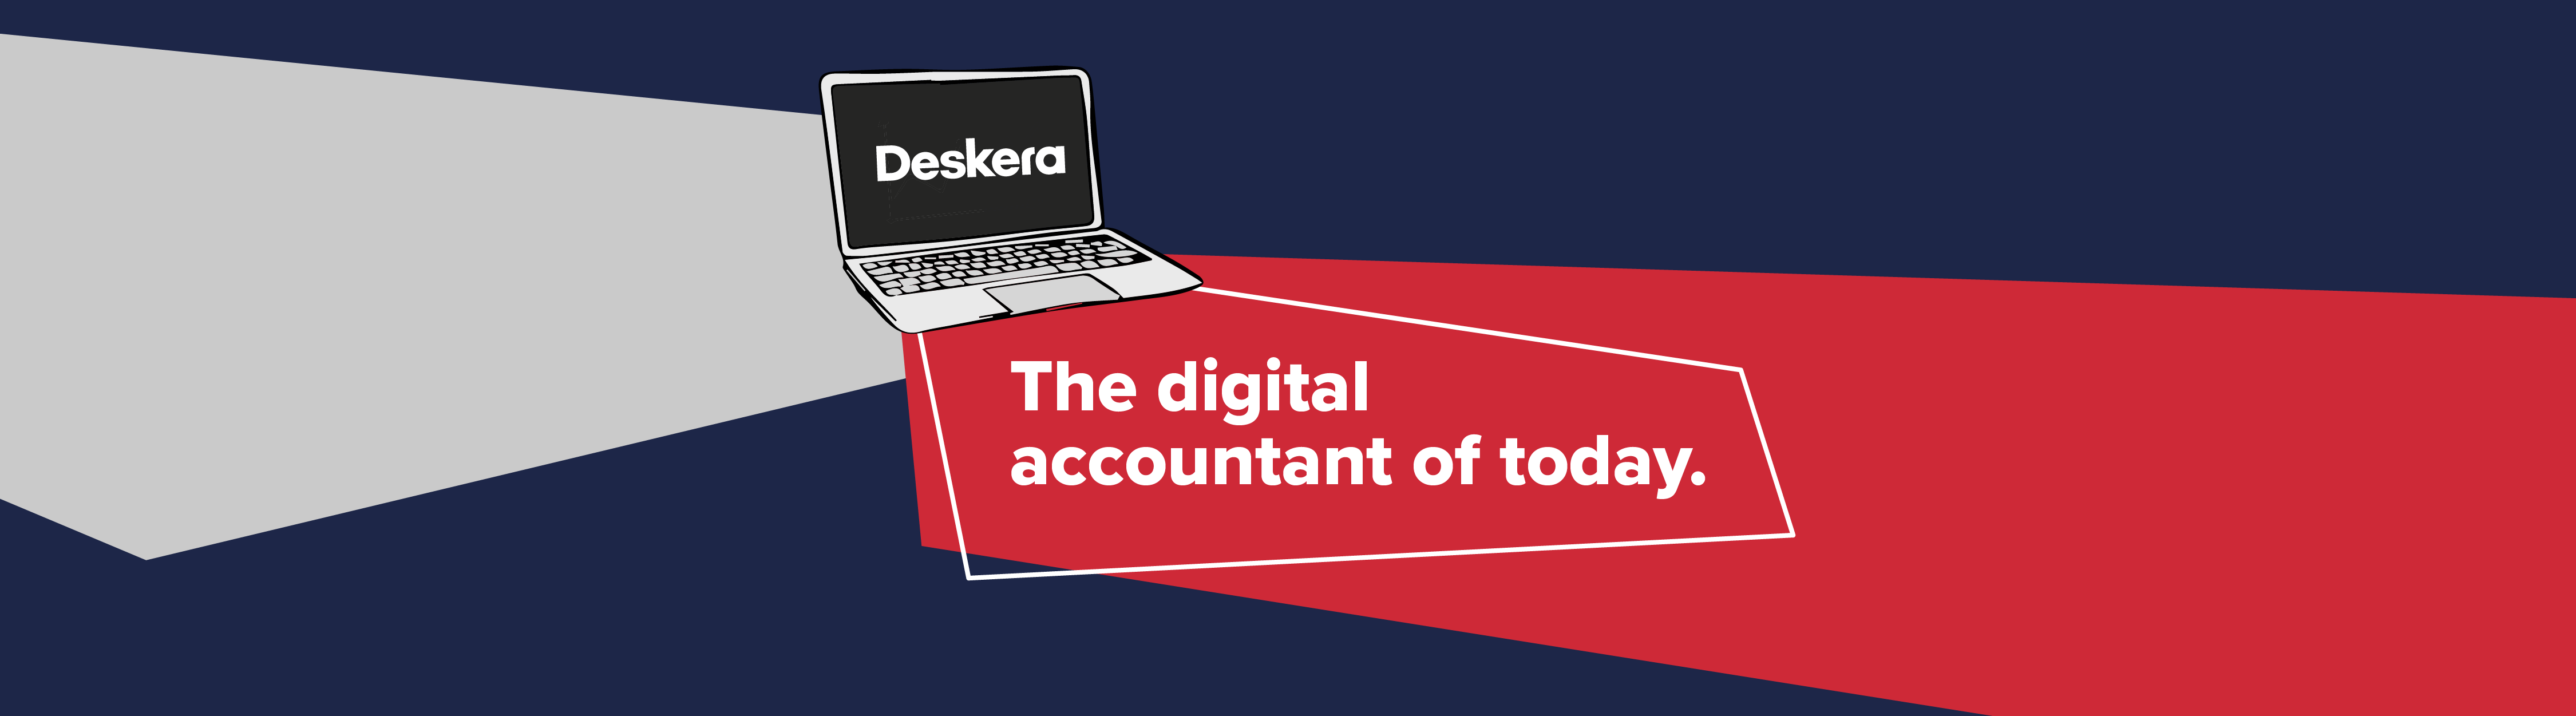 The Digital Accountant of Today